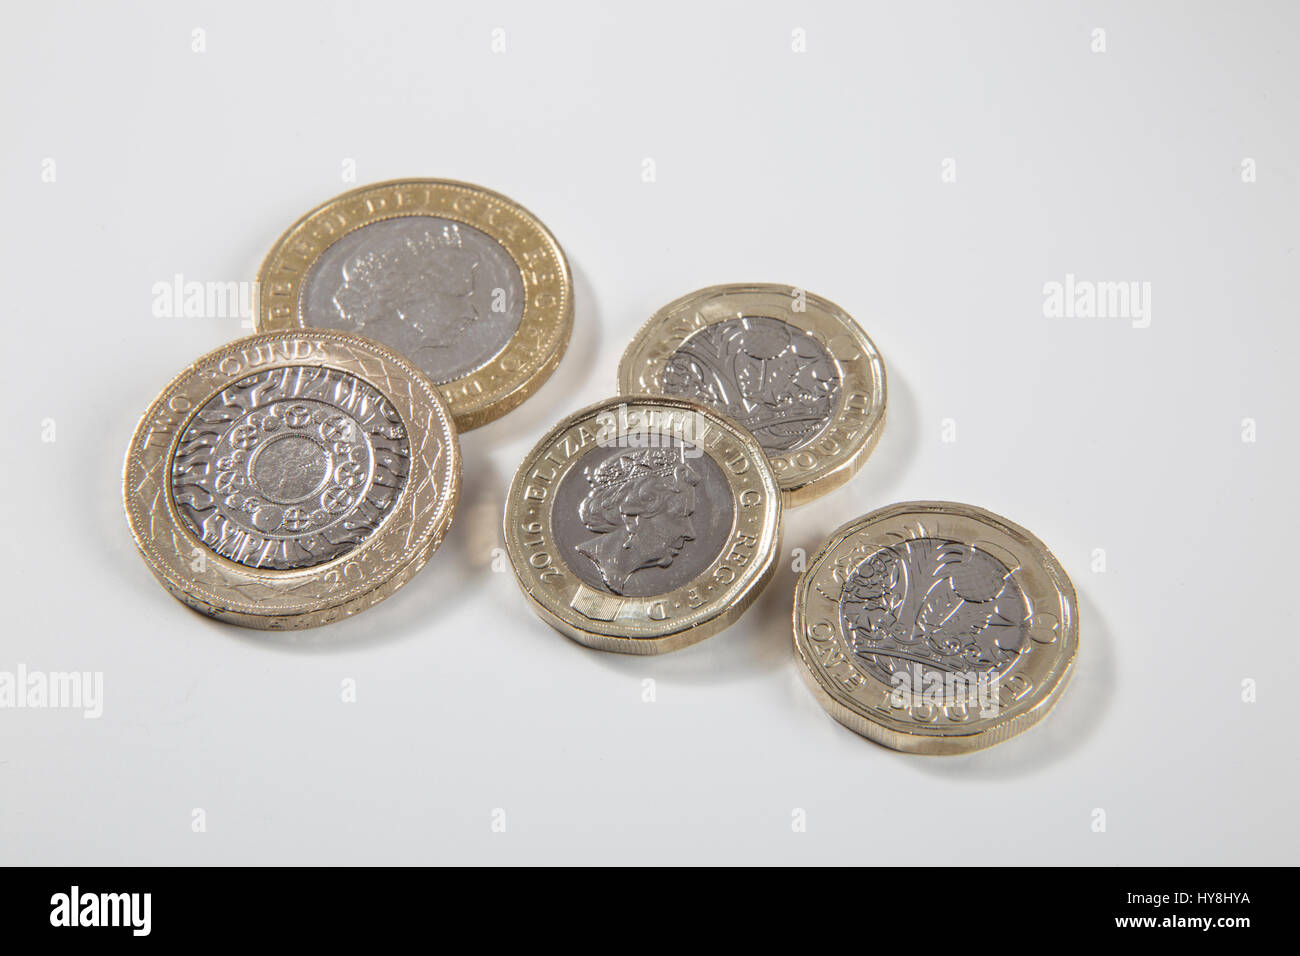 New £1 pound coin and £2 pound coins Stock Photo